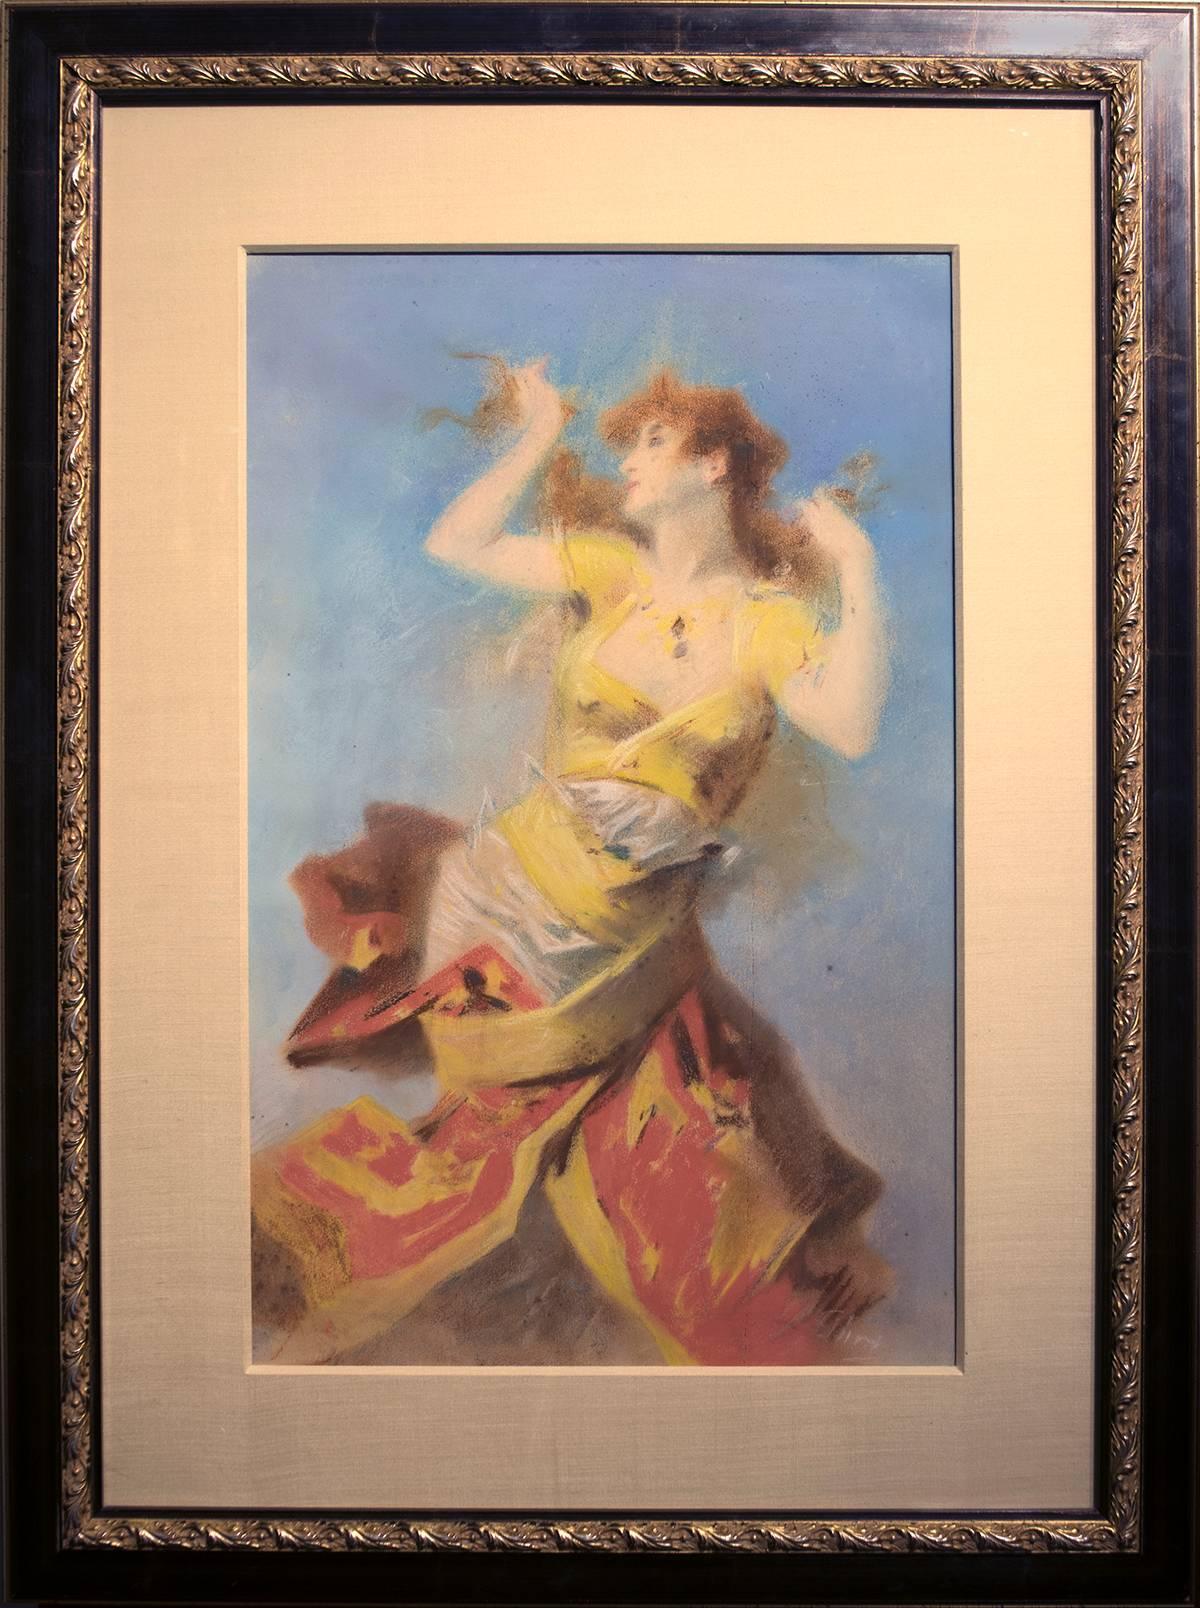 Jules Chéret Figurative Painting - Original Pastel Painting of a Dancing Woman by Jules Cheret, early 1900s